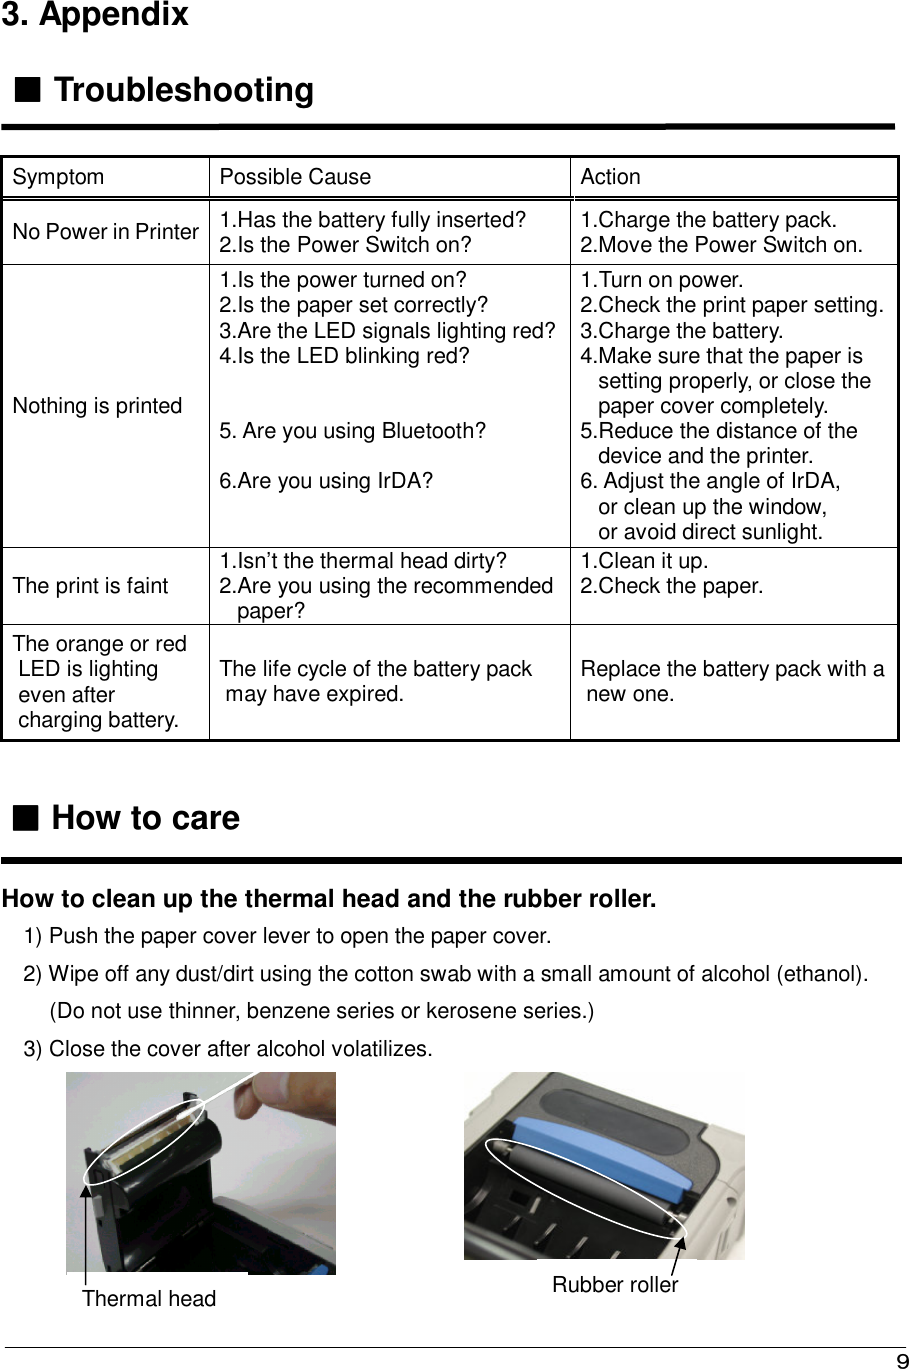   ９ 3. Appendix  ■■■■ Troubleshooting  Symptom  Possible Cause  Action No Power in Printer 1.Has the battery fully inserted? 2.Is the Power Switch on?  1.Charge the battery pack. 2.Move the Power Switch on. Nothing is printed 1.Is the power turned on? 2.Is the paper set correctly? 3.Are the LED signals lighting red?  4.Is the LED blinking red?   5. Are you using Bluetooth?  6.Are you using IrDA?   1.Turn on power. 2.Check the print paper setting. 3.Charge the battery. 4.Make sure that the paper is     setting properly, or close the     paper cover completely. 5.Reduce the distance of the     device and the printer. 6. Adjust the angle of IrDA,    or clean up the window,    or avoid direct sunlight. The print is faint  1.Isn’t the thermal head dirty? 2.Are you using the recommended    paper? 1.Clean it up. 2.Check the paper.  The orange or red  LED is lighting   even after   charging battery. The life cycle of the battery pack  may have expired.  Replace the battery pack with a  new one.   ■■■■ How to care  How to clean up the thermal head and the rubber roller.  1) Push the paper cover lever to open the paper cover. 2) Wipe off any dust/dirt using the cotton swab with a small amount of alcohol (ethanol).         (Do not use thinner, benzene series or kerosene series.) 3) Close the cover after alcohol volatilizes.      Rubber roller Thermal head 